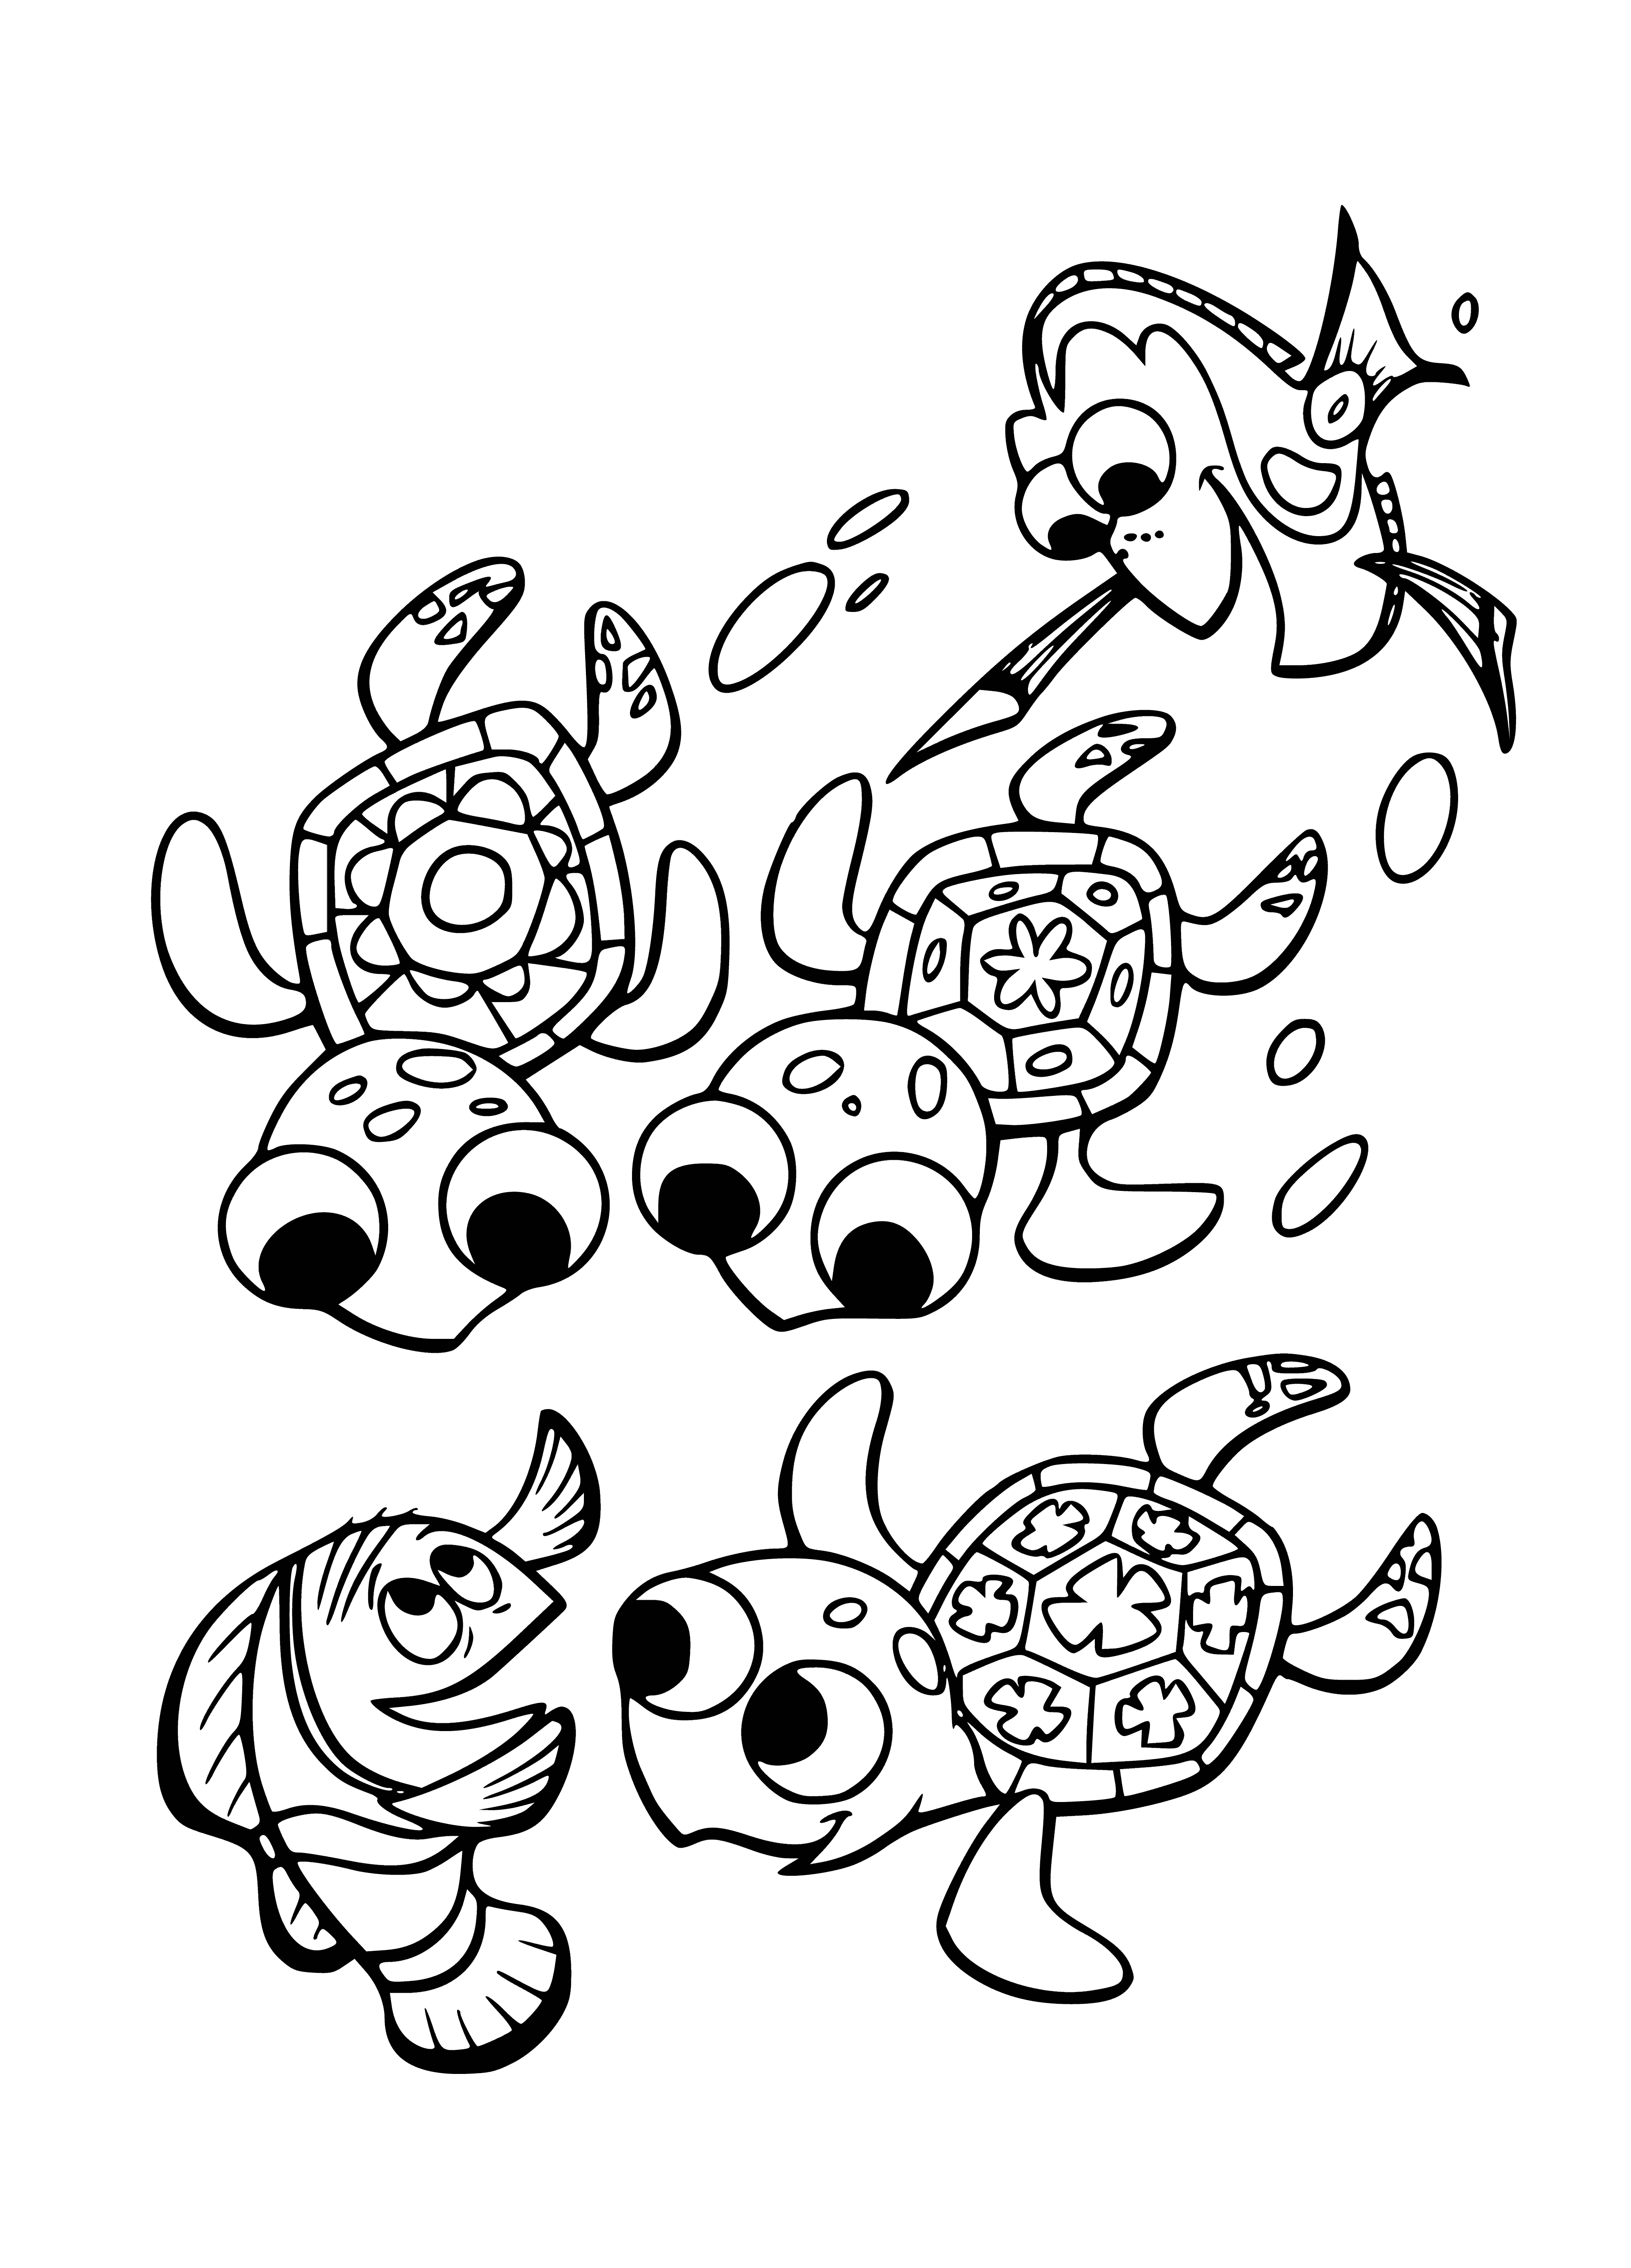 coloring page: 3 turtles swim in a large body of water in shades of green; middle turtle is in-between in size & color; all turtles appear content, eyes closed & mouths open.